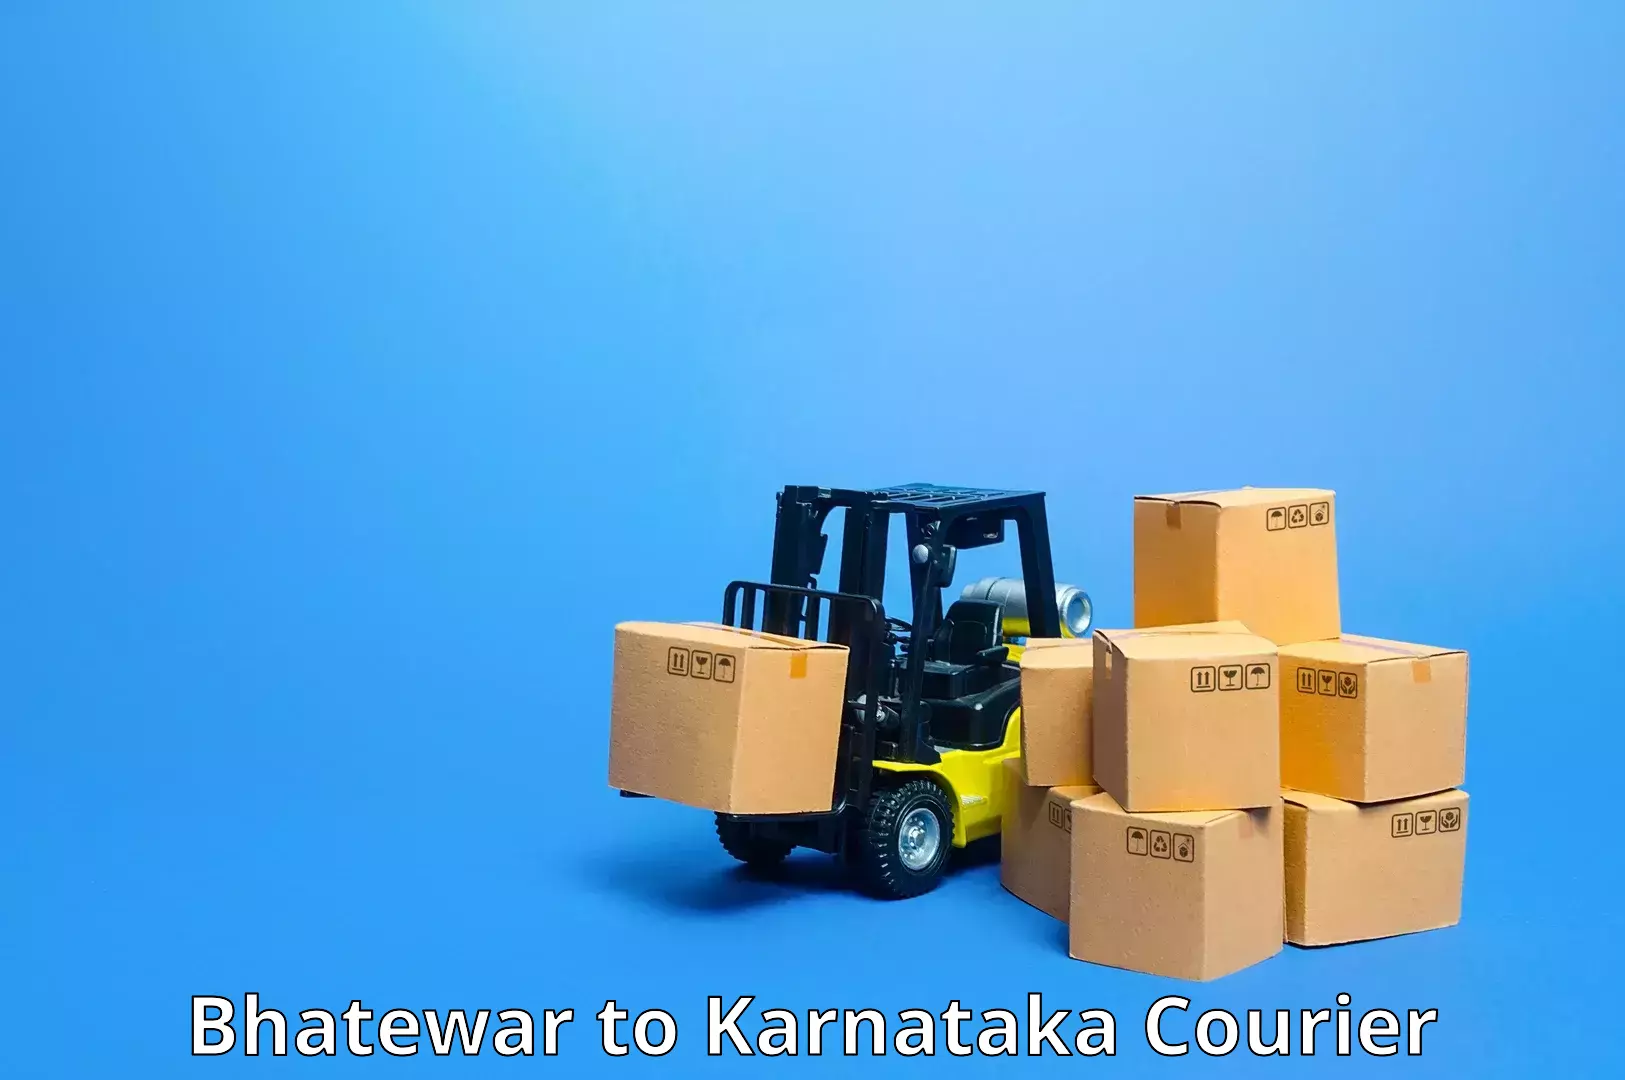 Multi-national courier services Bhatewar to Yellare